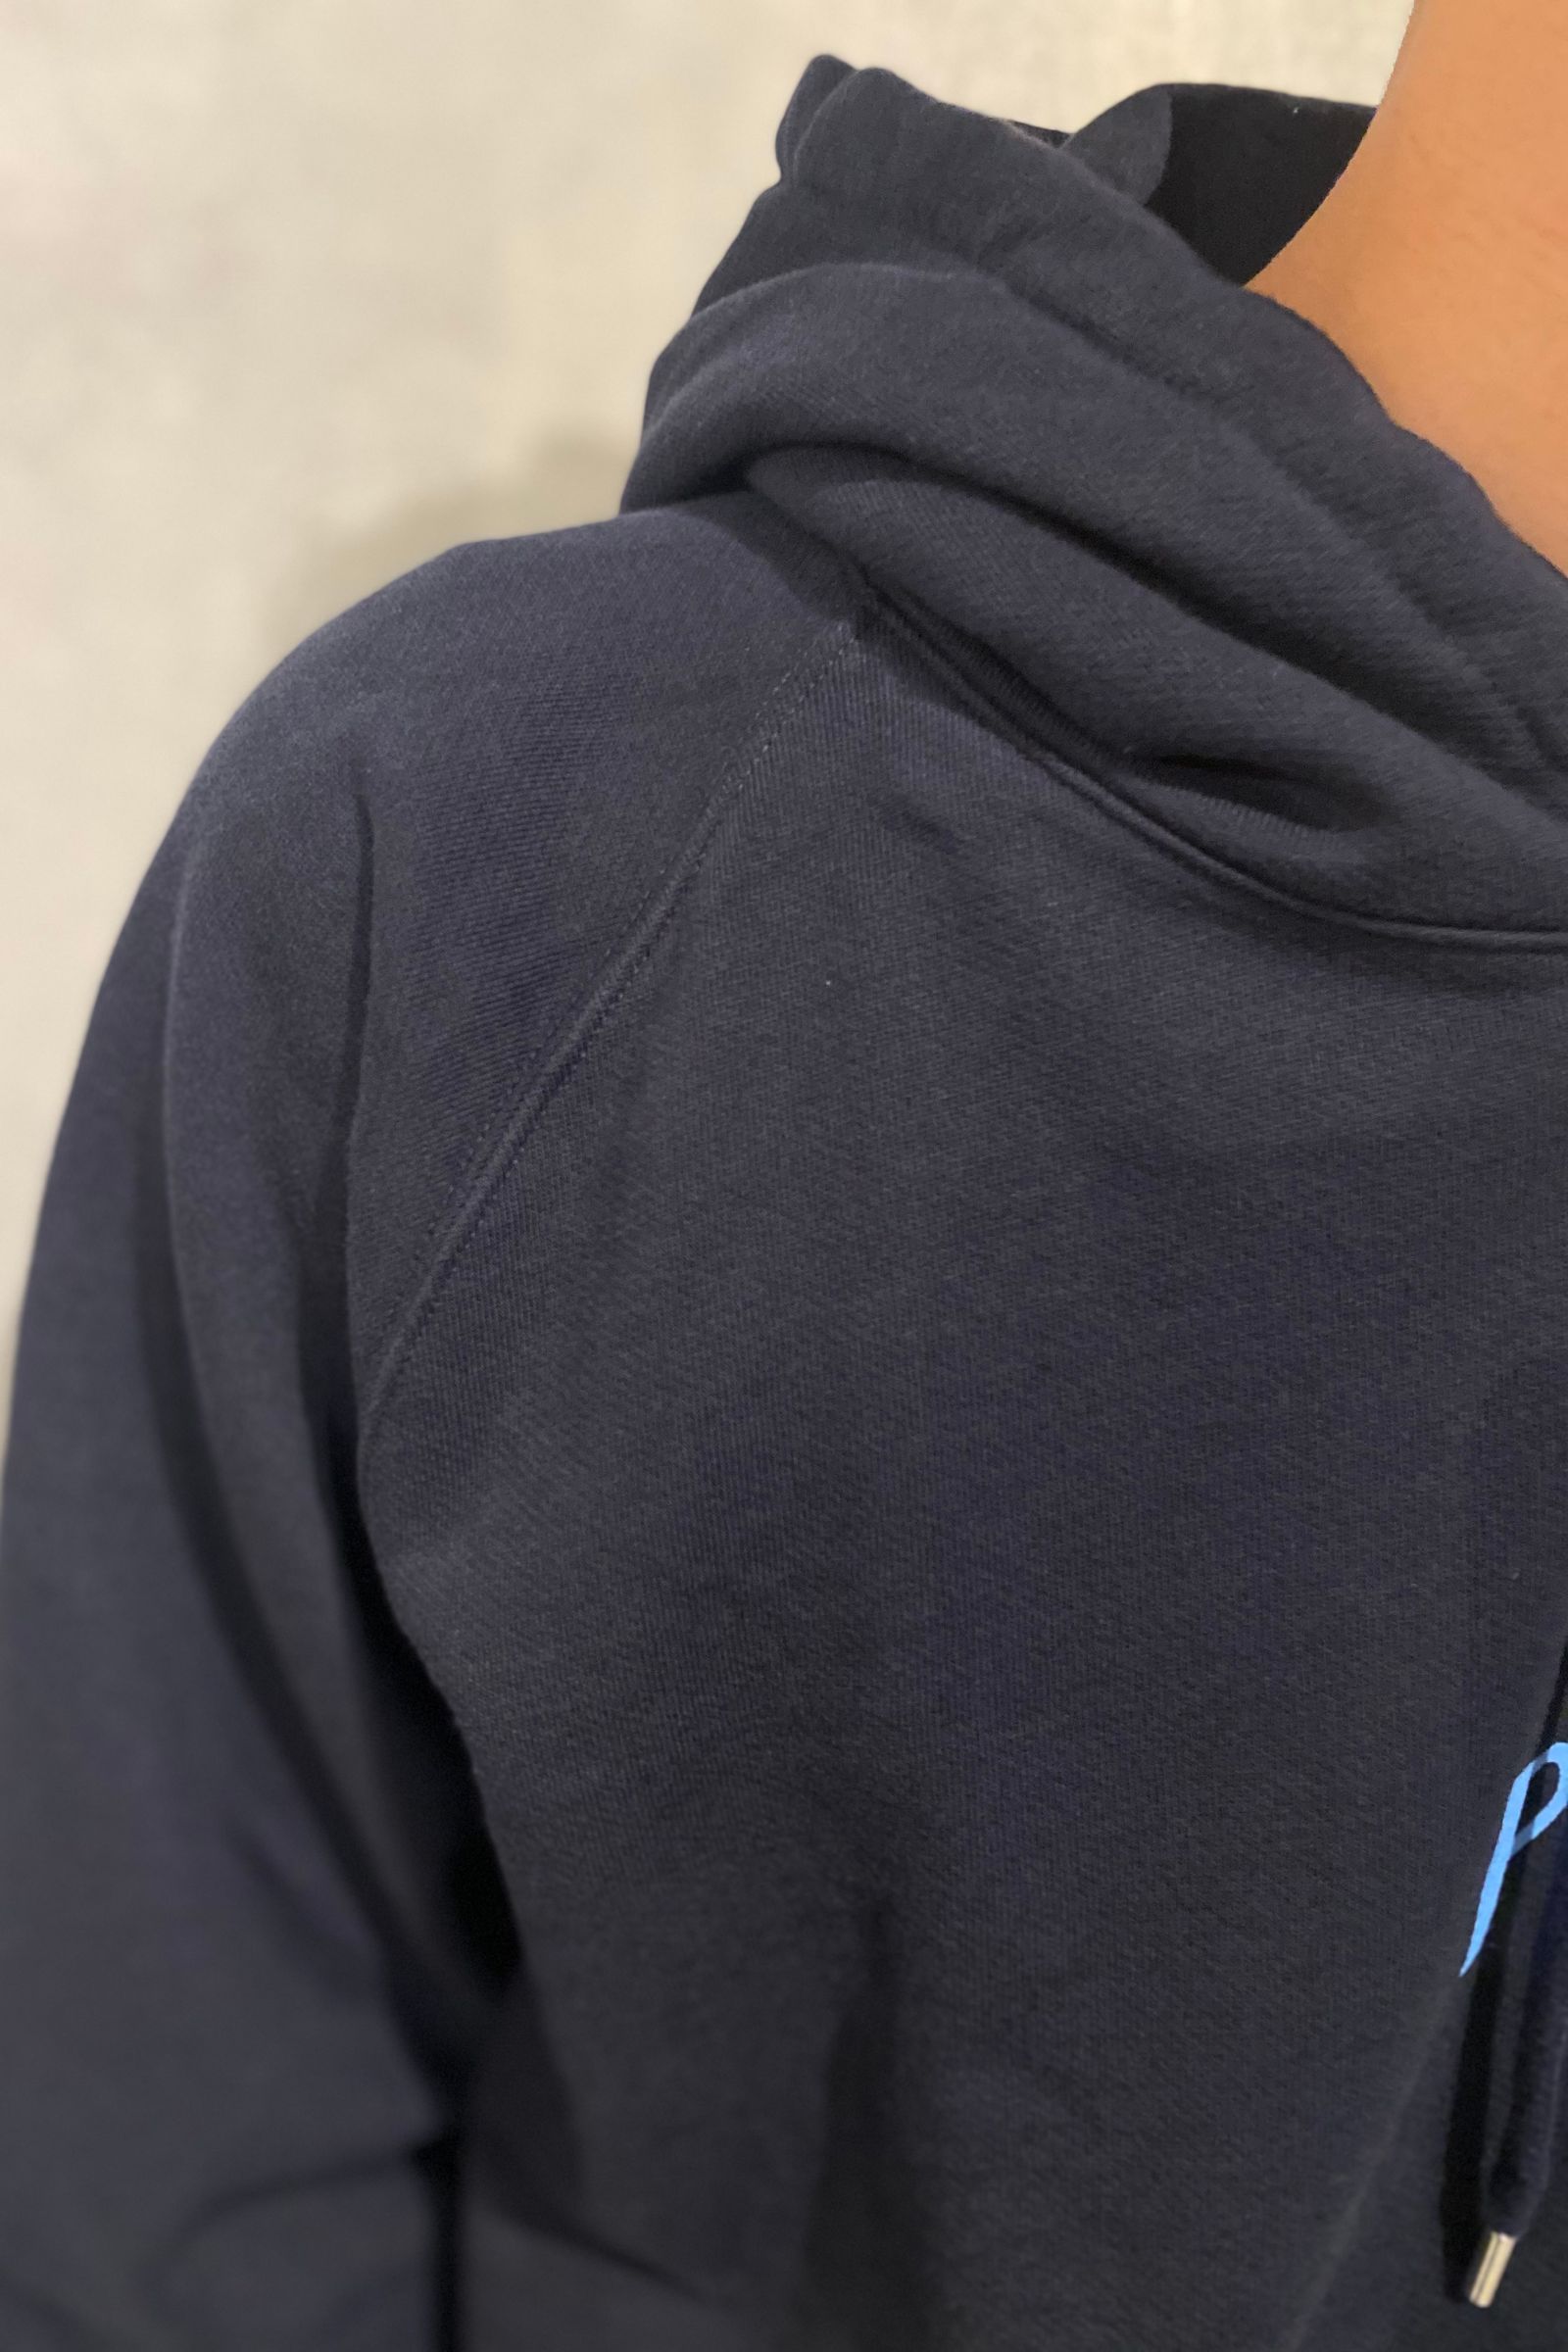 × dancer hooded sweat 21aw - L - NAVY